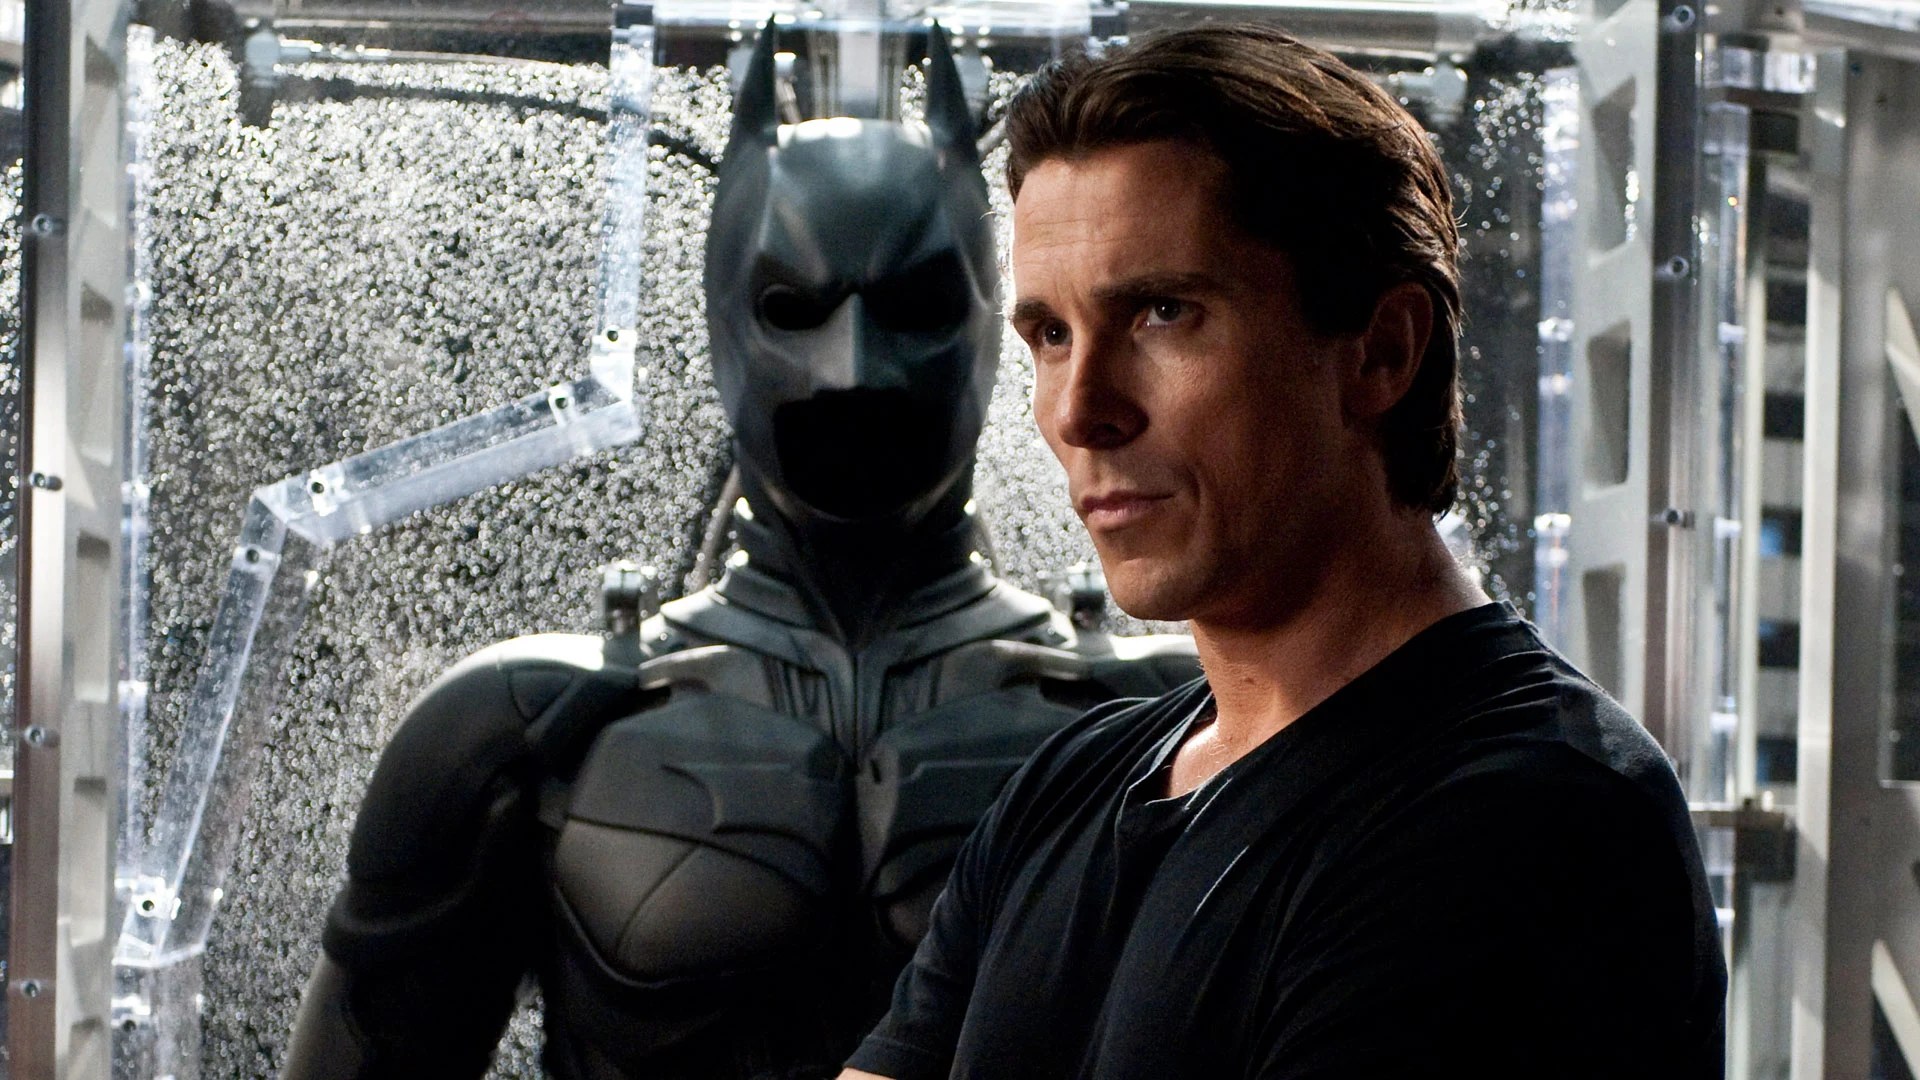 Is The Dark Knight Rises a bad film or simply misunderstood?